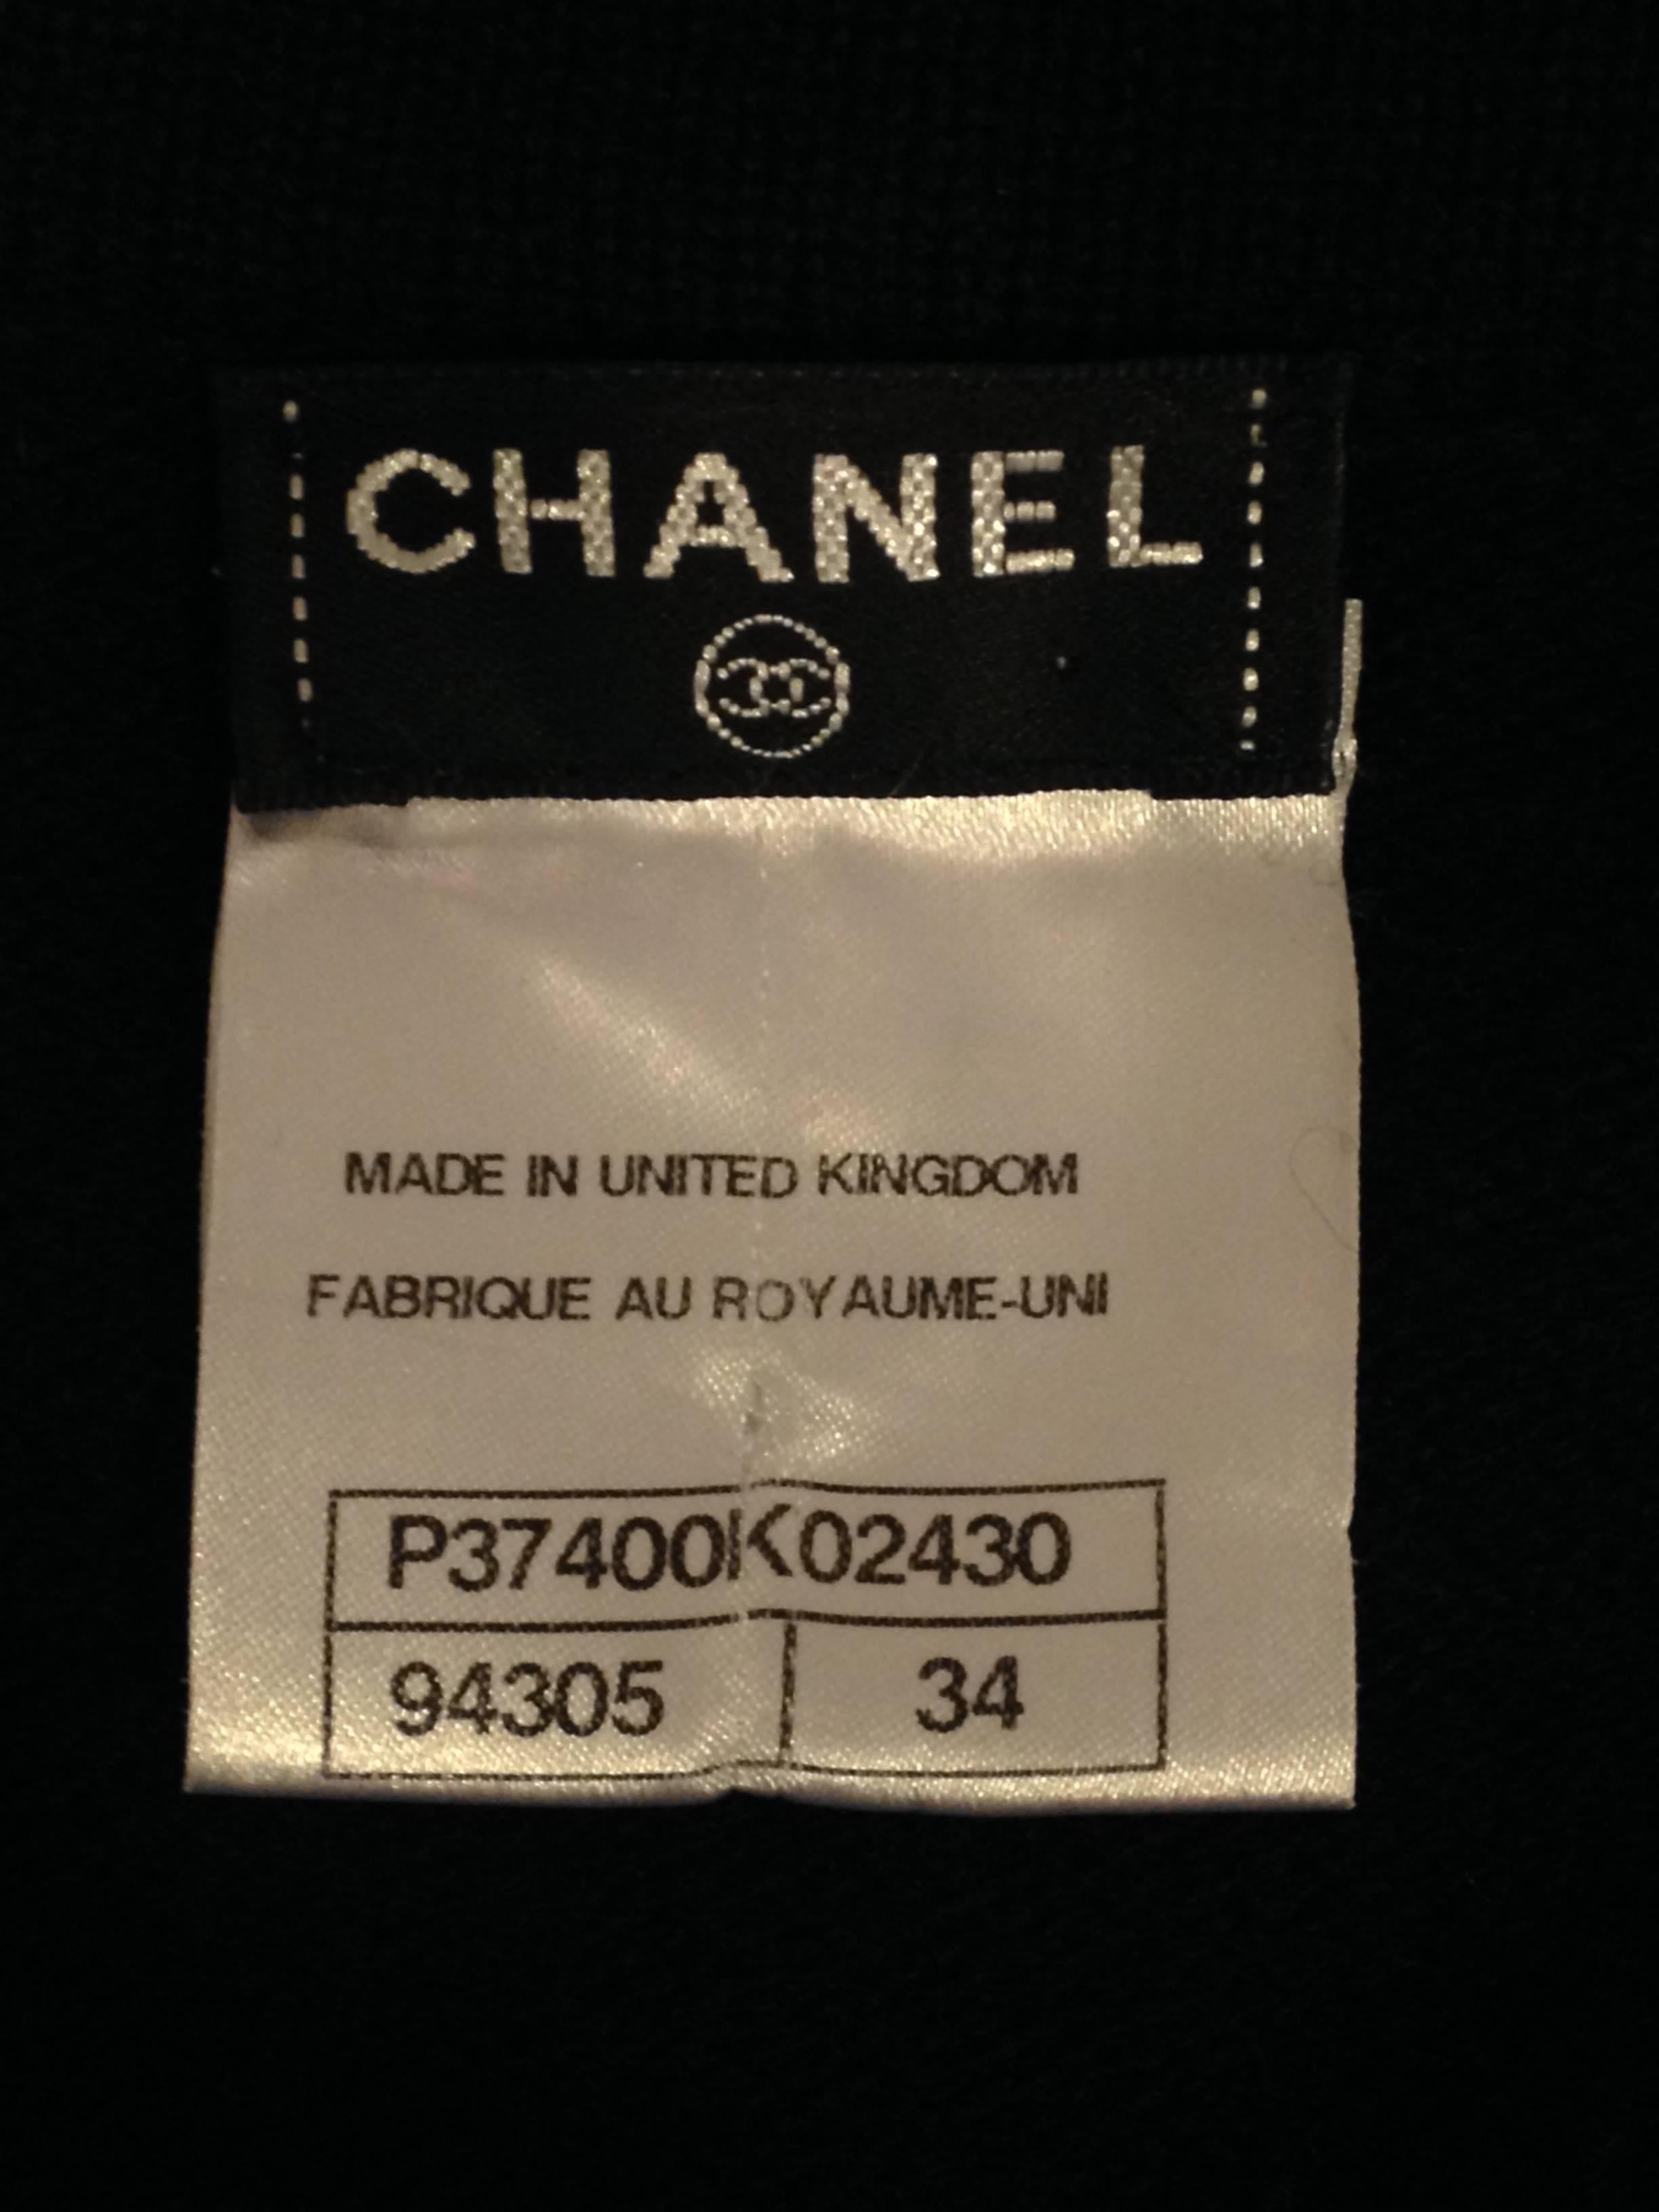 Chanel Black Cashmere Long Cardigan Size 34 (2) For Sale 3